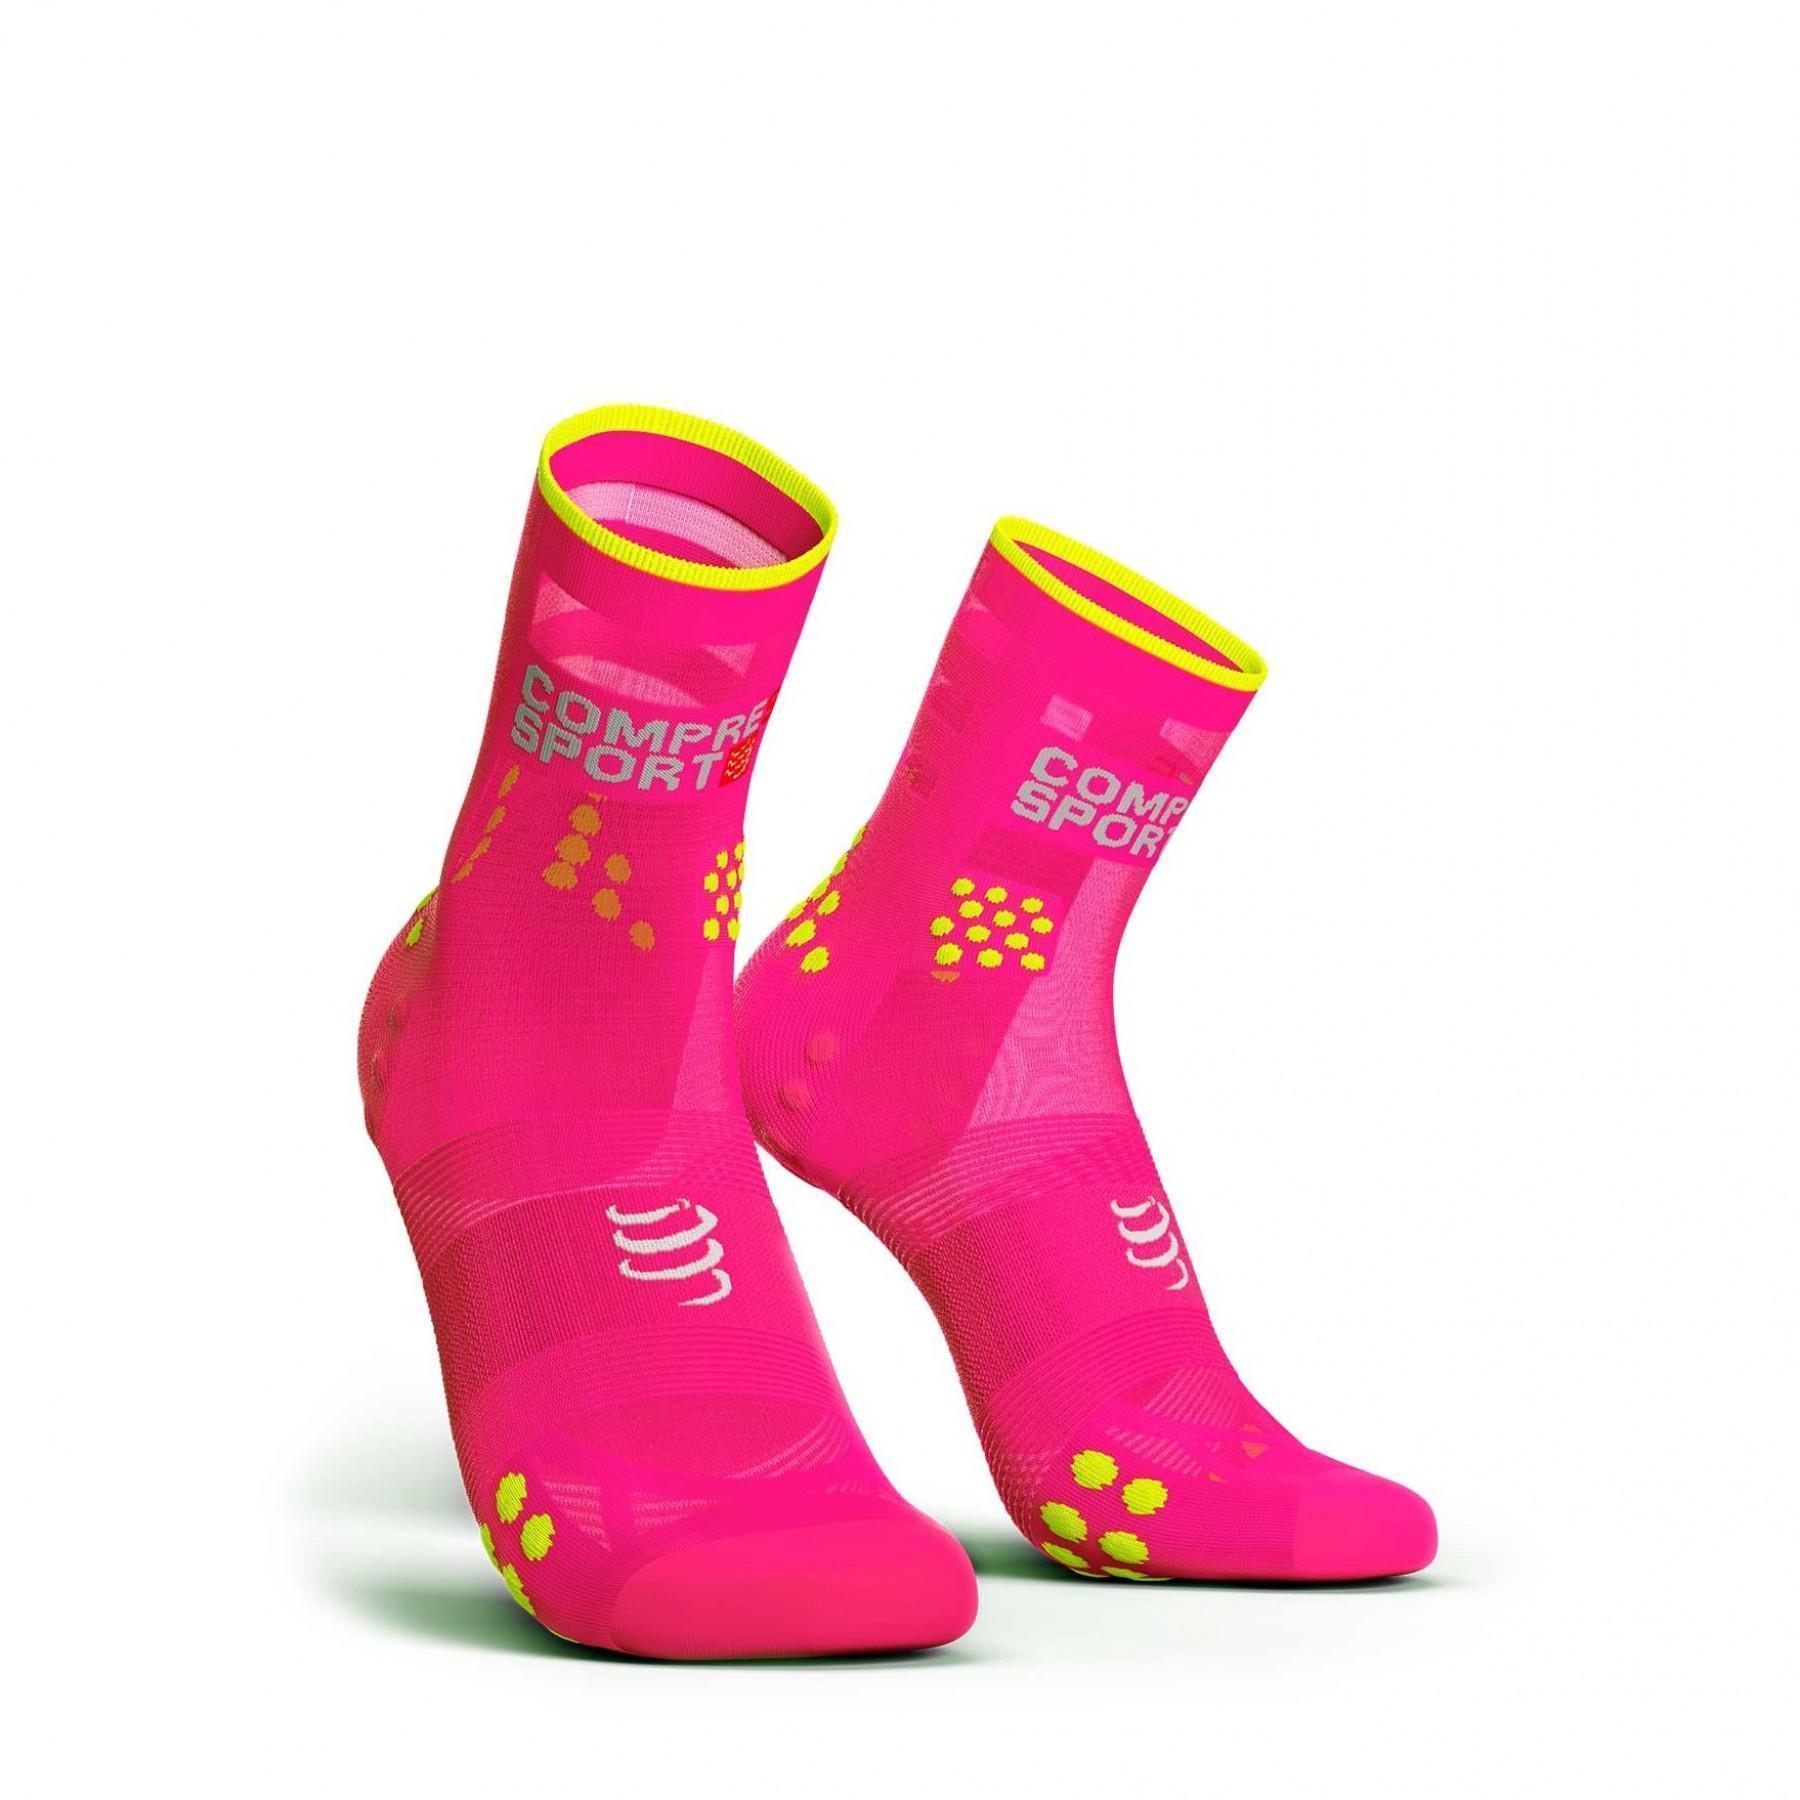 Chaussettes Compressport Pro Racing Run Low